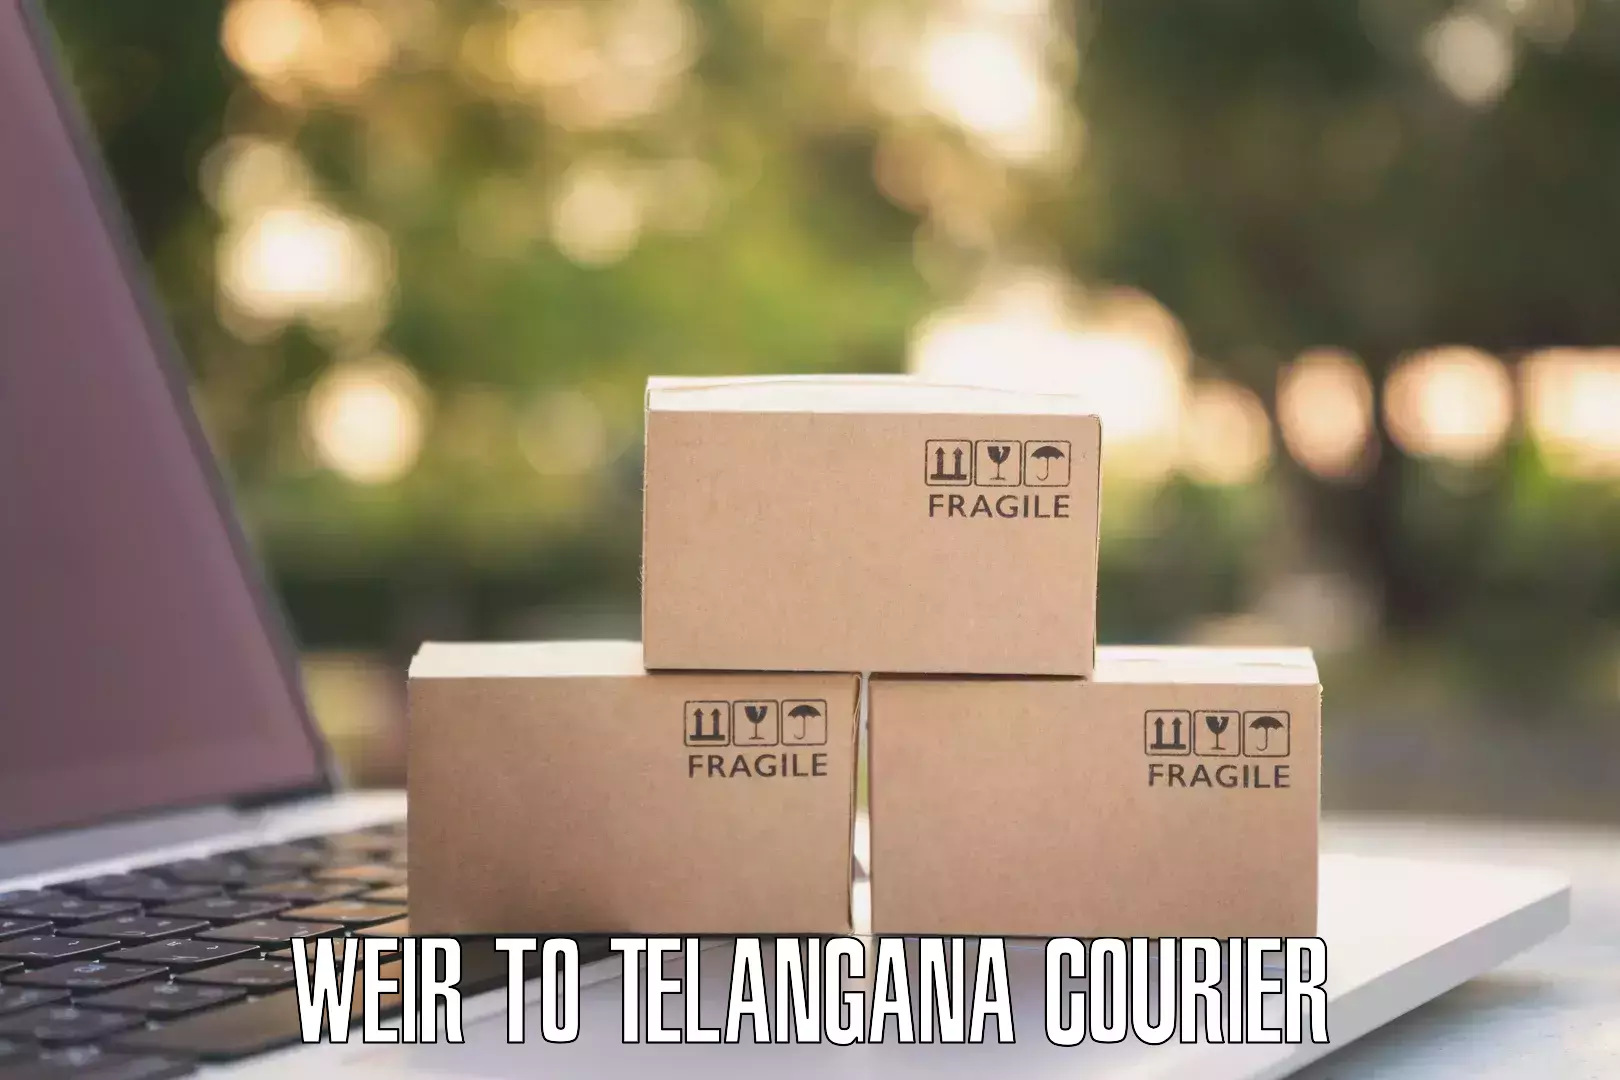 Cost-effective courier options Weir to Telangana